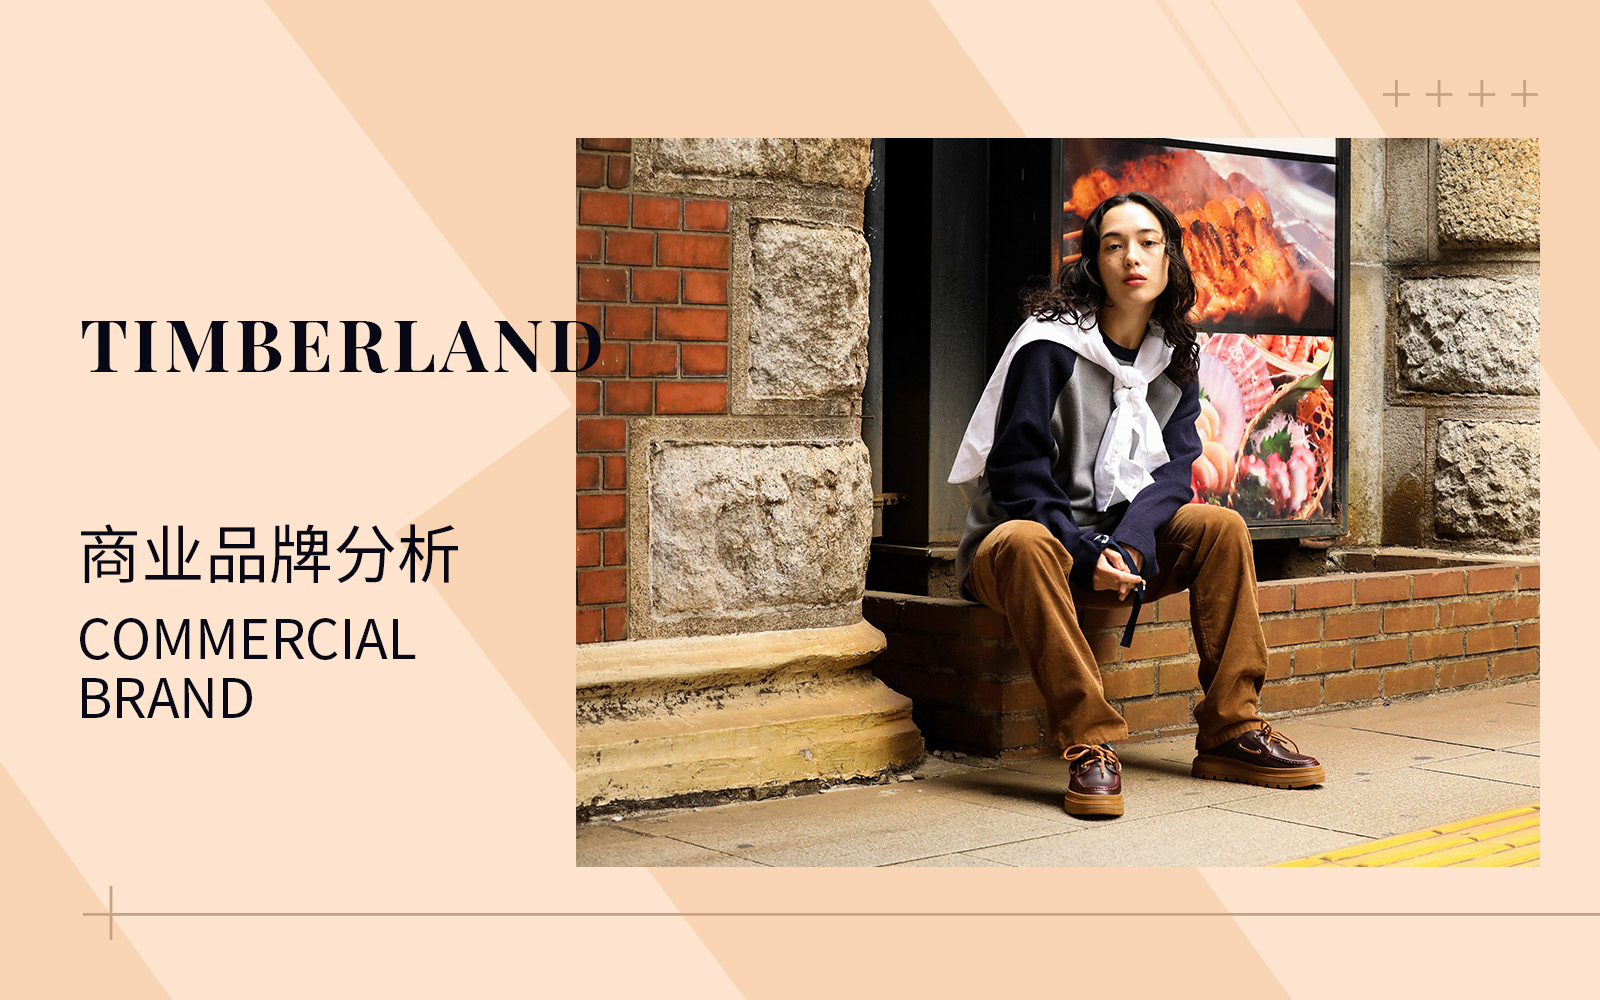 The Analysis of Timberland The Benchmark Outdoorwear Brand